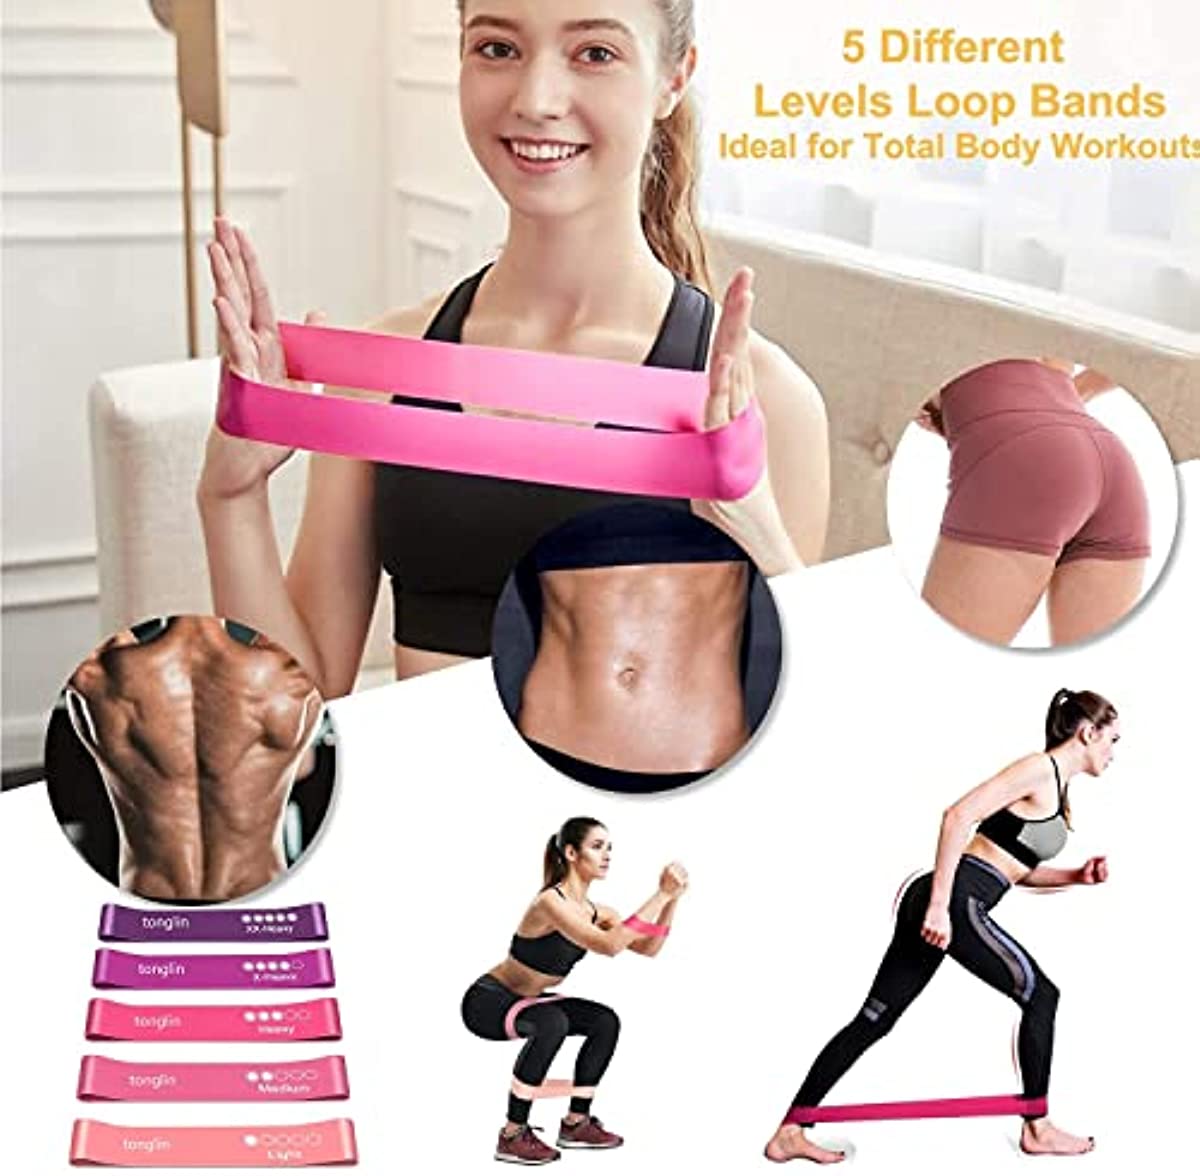 Resistance Bands, Resistance Band Set, Motion Band with Door Anchor, Female Fitness Equipment, Yoga, Male Muscle Training, Physical Therapy, Body -Shaping,for Family Exercise Set (17 Pieces)